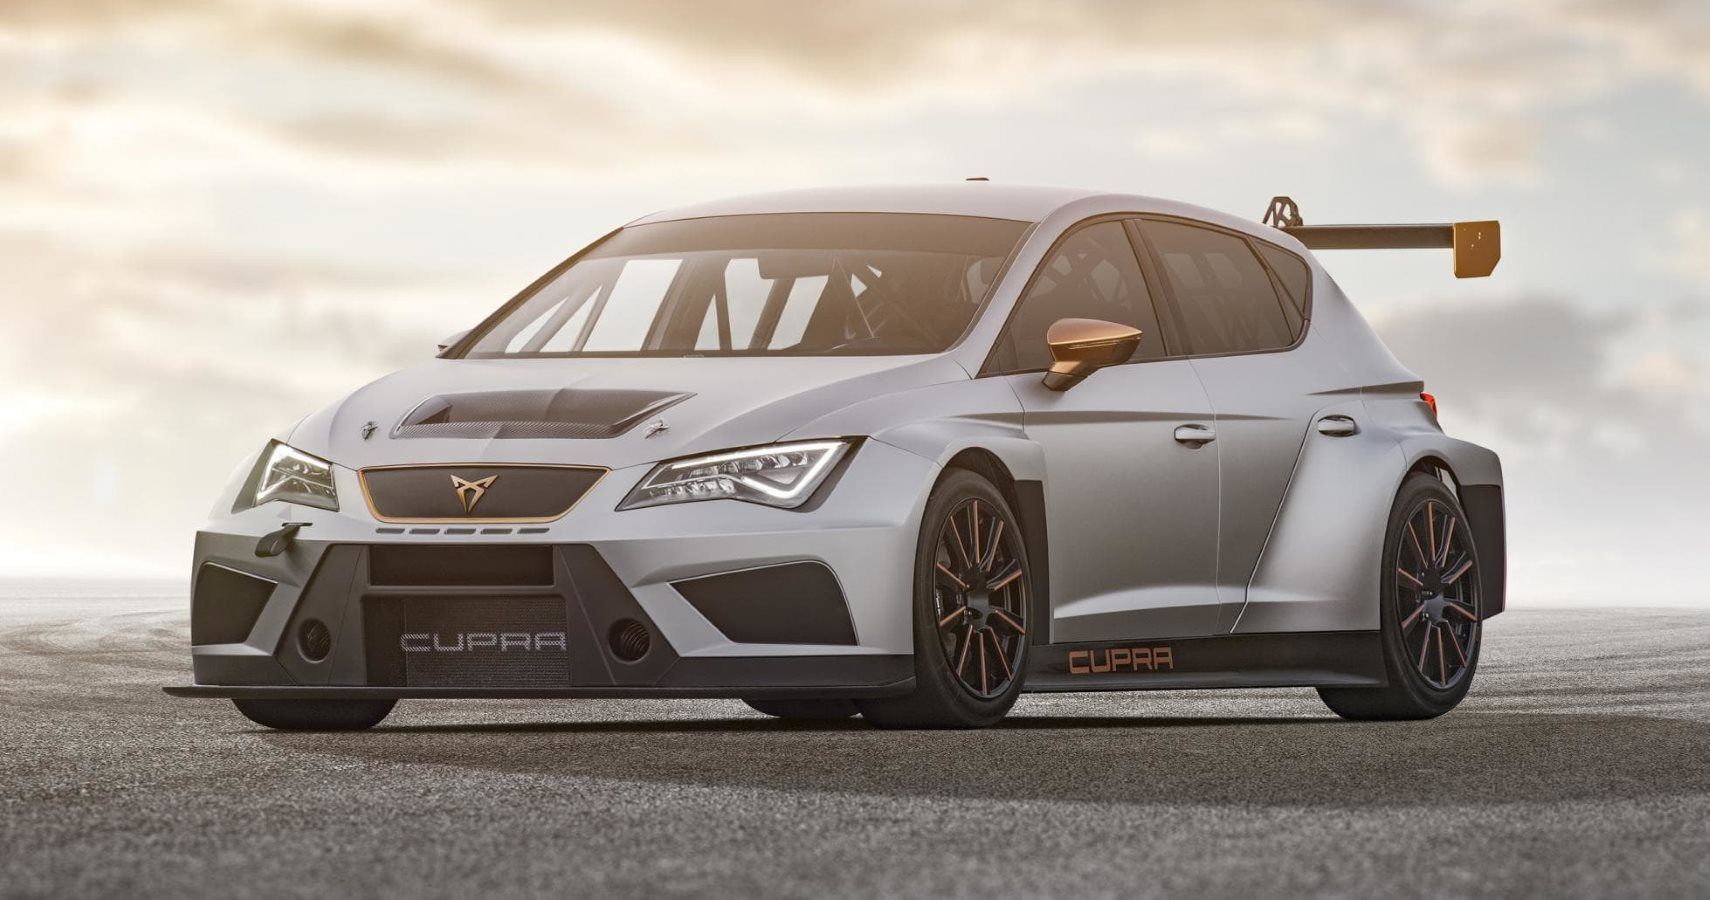 Review: Cupra TCR - Spanish Flair In A Touring Car